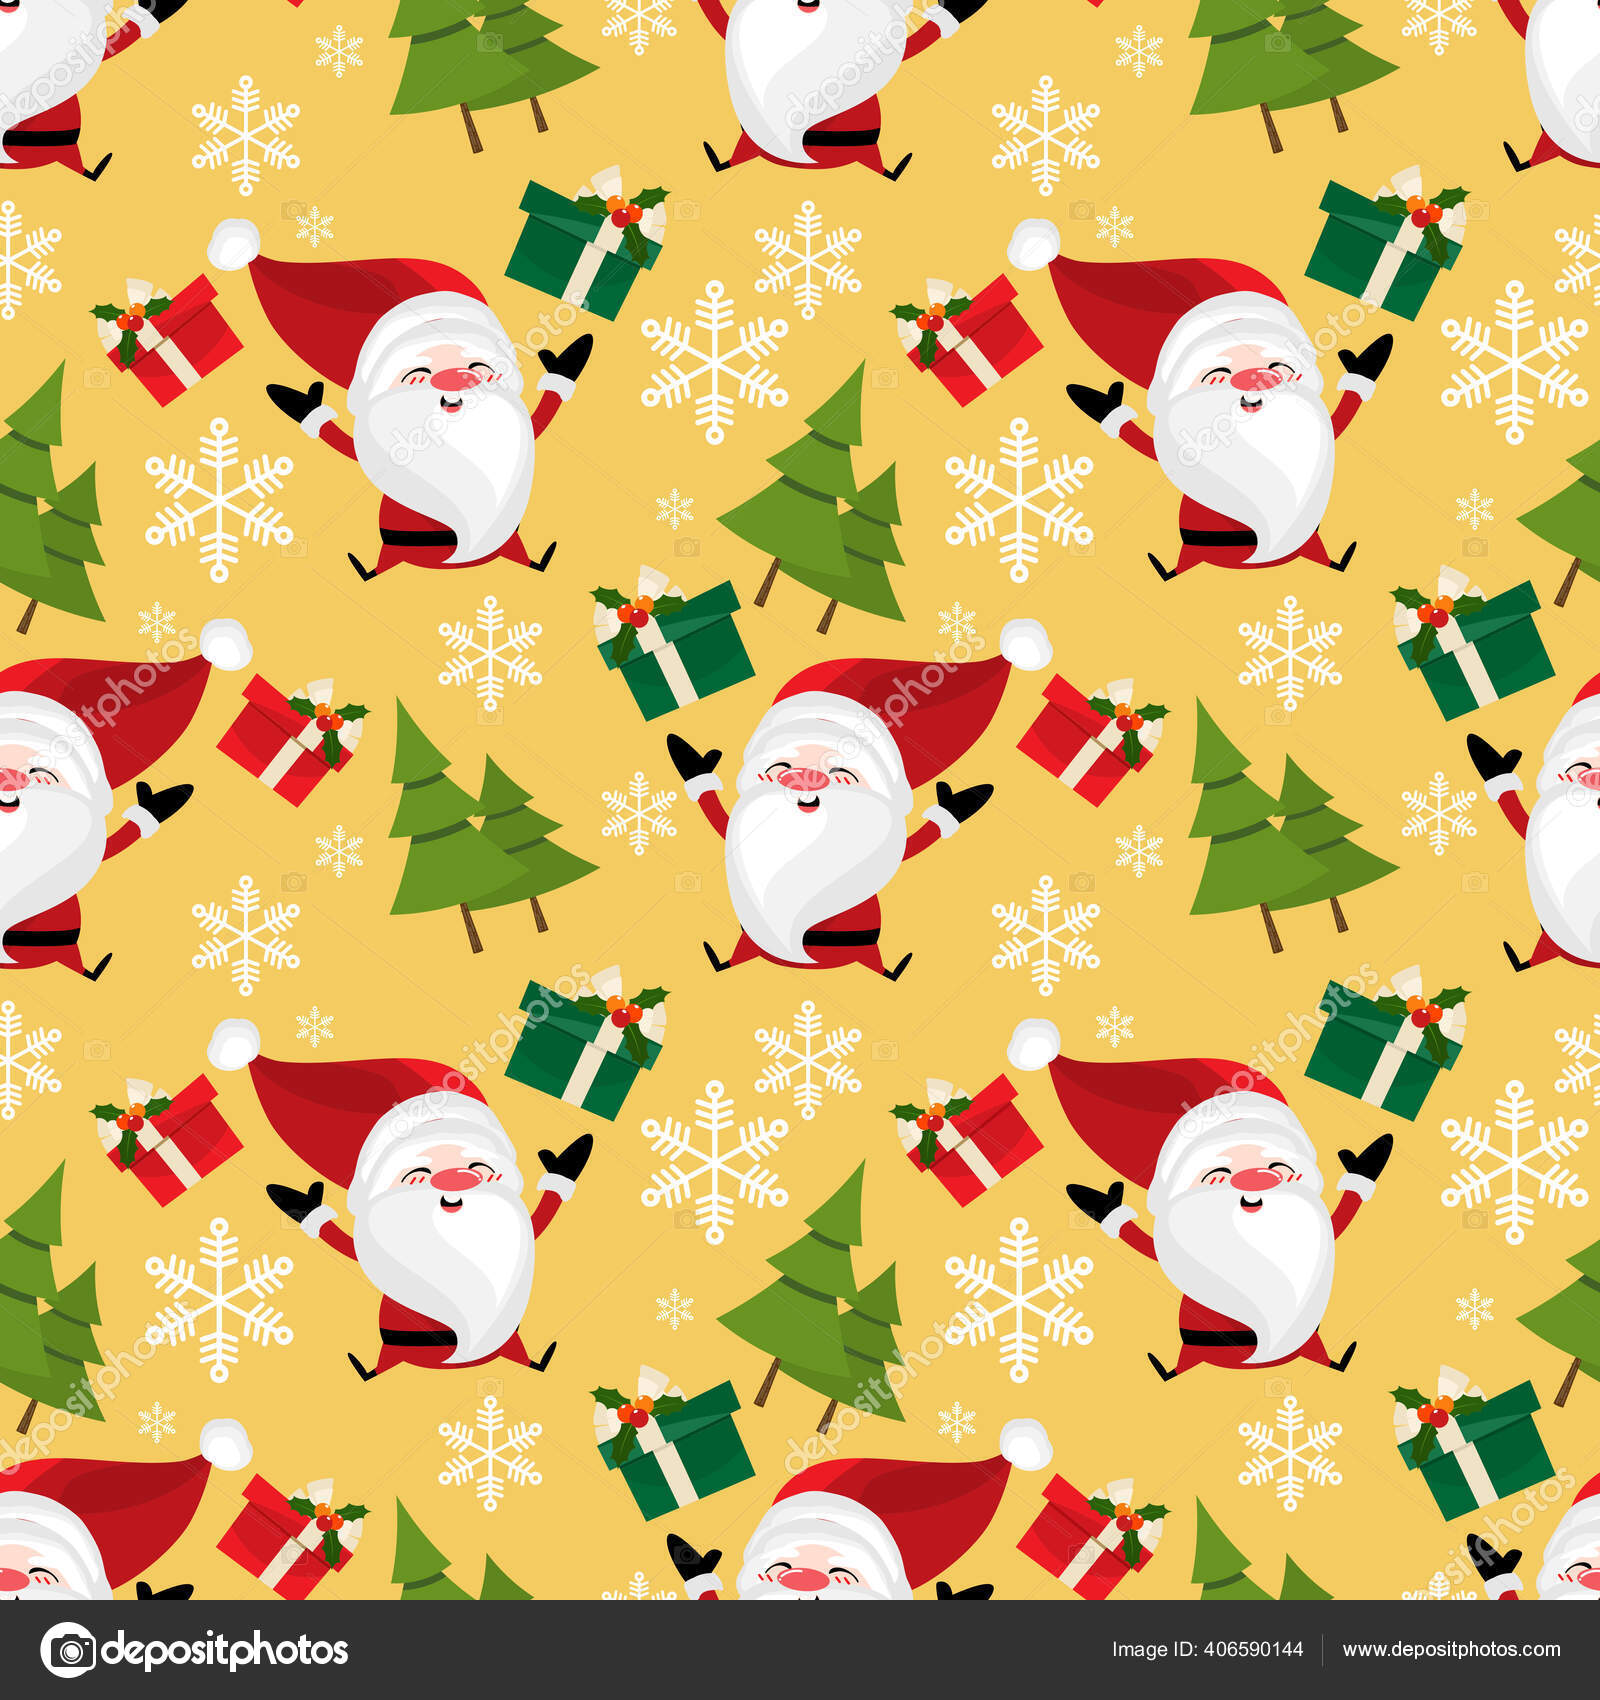 Happy Christmas Santa Claus - Wrapping Paper